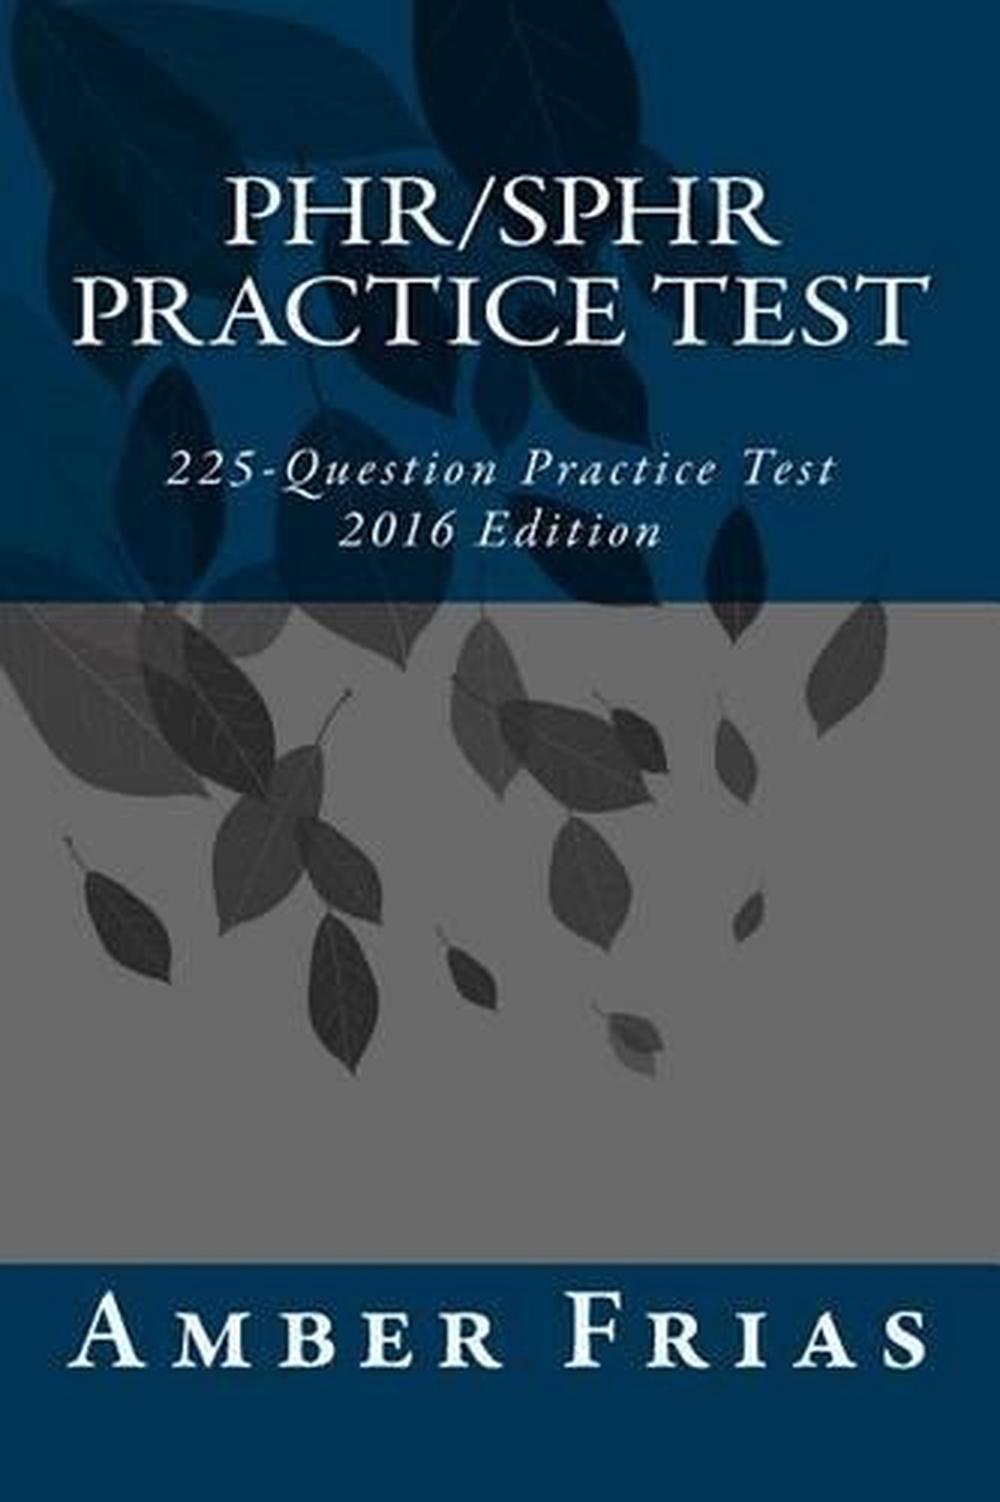 Phr/Sphr Practice Test 2016 Edition 225Question Practice Test by Amber Frias 9781515039419